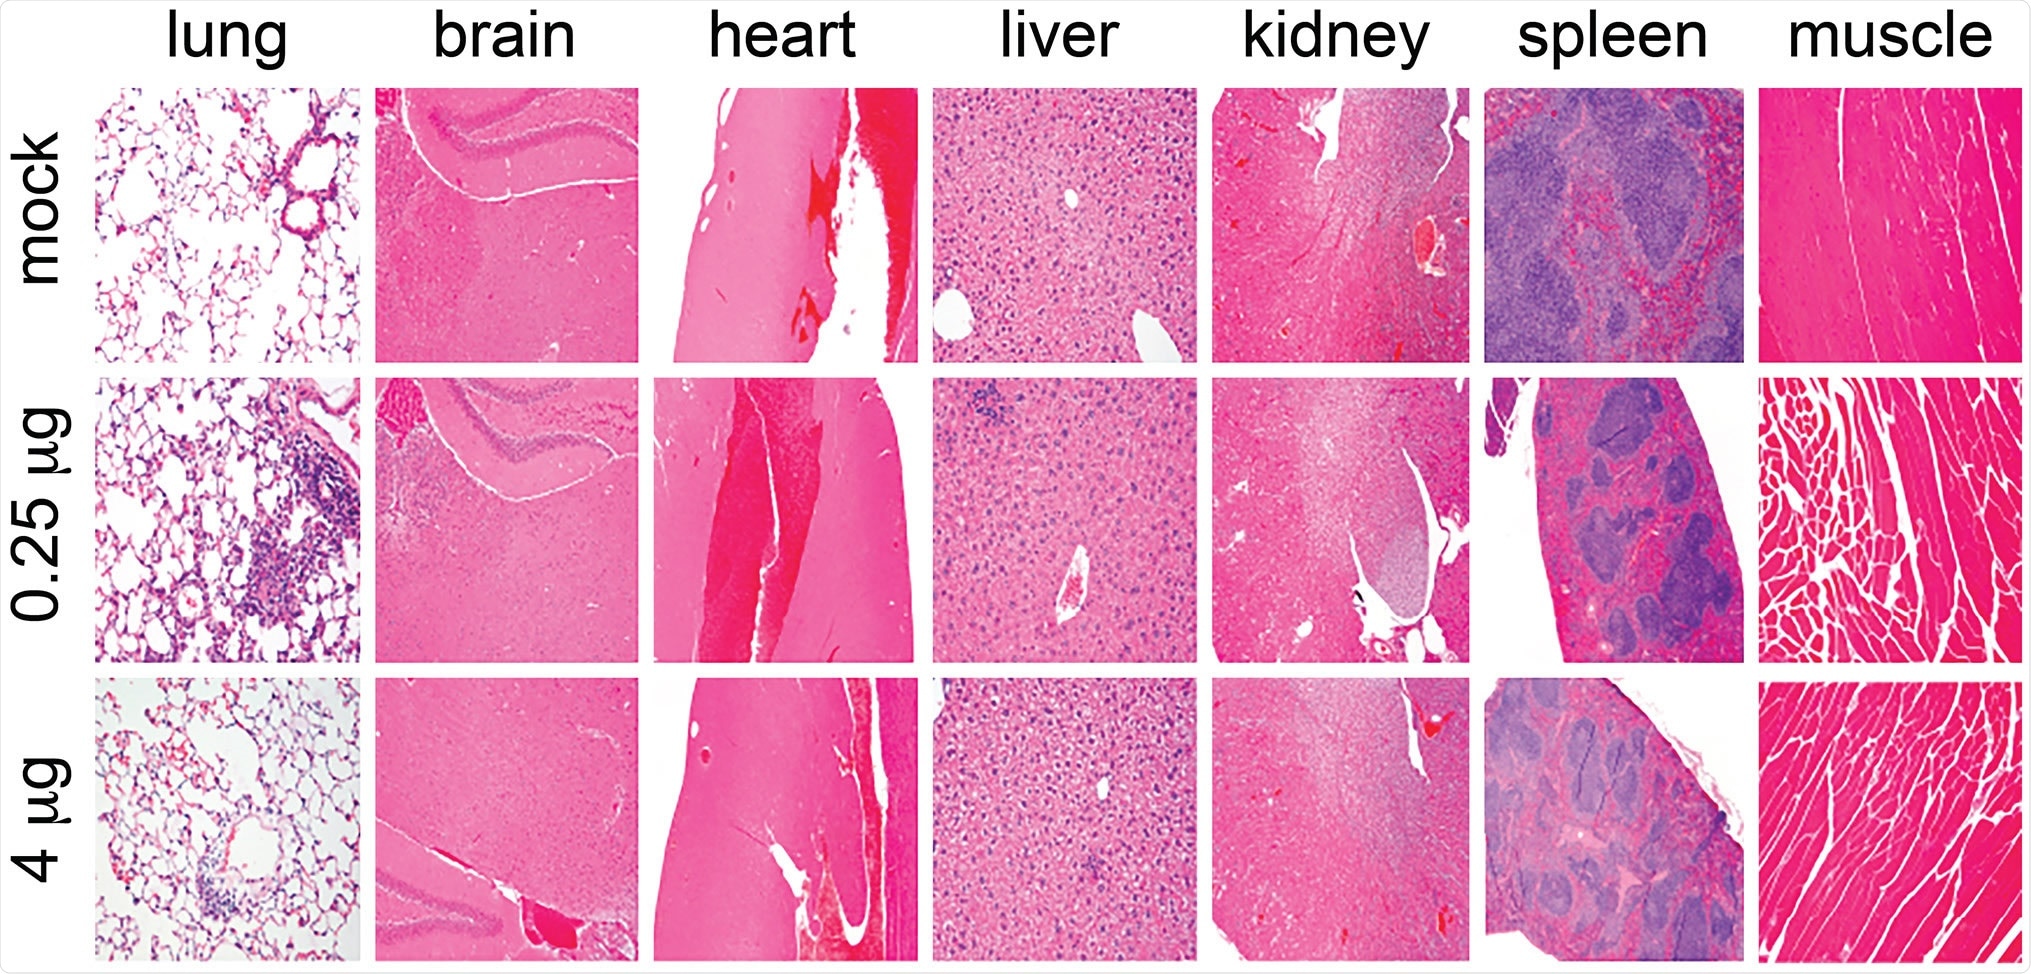 Absence of tissue pathology upon LSNME/SW1 vaccination. Representative micrographs from histological analysis (hematoxylin and eosin stain) of lung, brain, heart, liver, kidney, spleen, and muscle (side of injection) of animals from (upper row) control mice, (middle row) mice immunized with the lower dose of the LSNME/SW1 vaccine, and (lower row) mice immunized with the higher dose of the LSNME/SW1 vaccine.